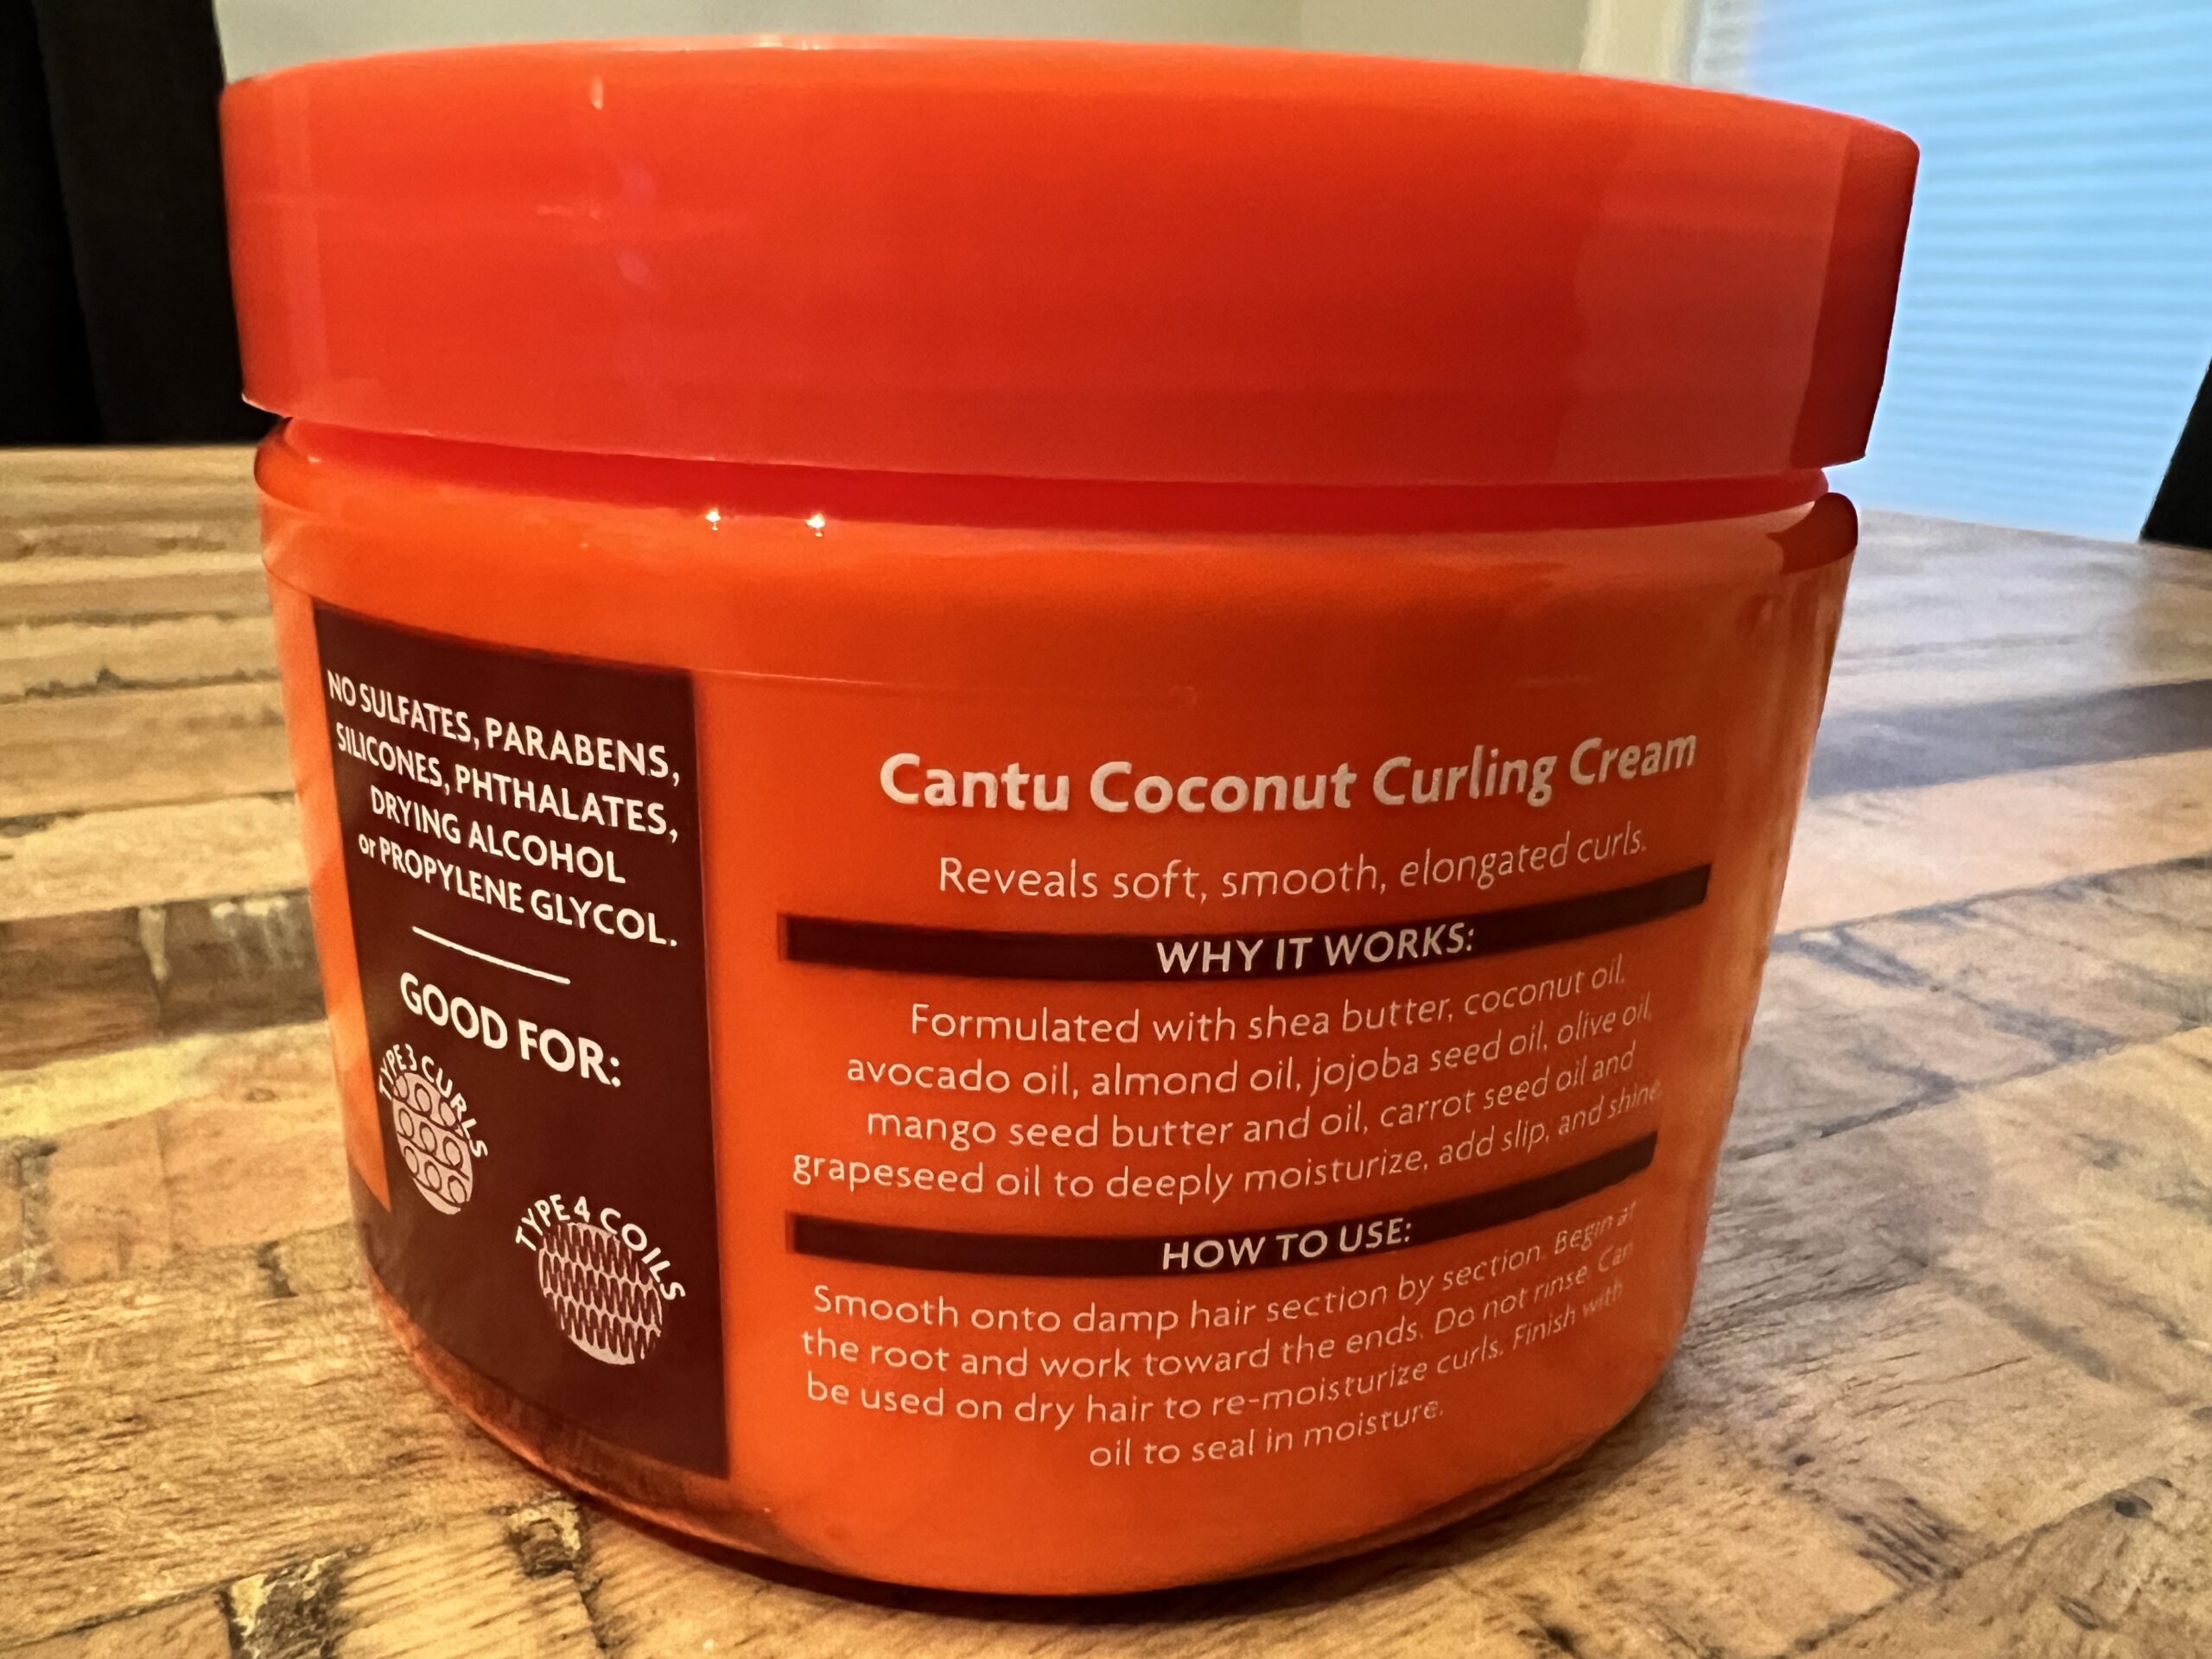 Back of Cantu Coconut Curling Cream packaging showing why it works and how to use it for type 3 curls and type 4 coils.